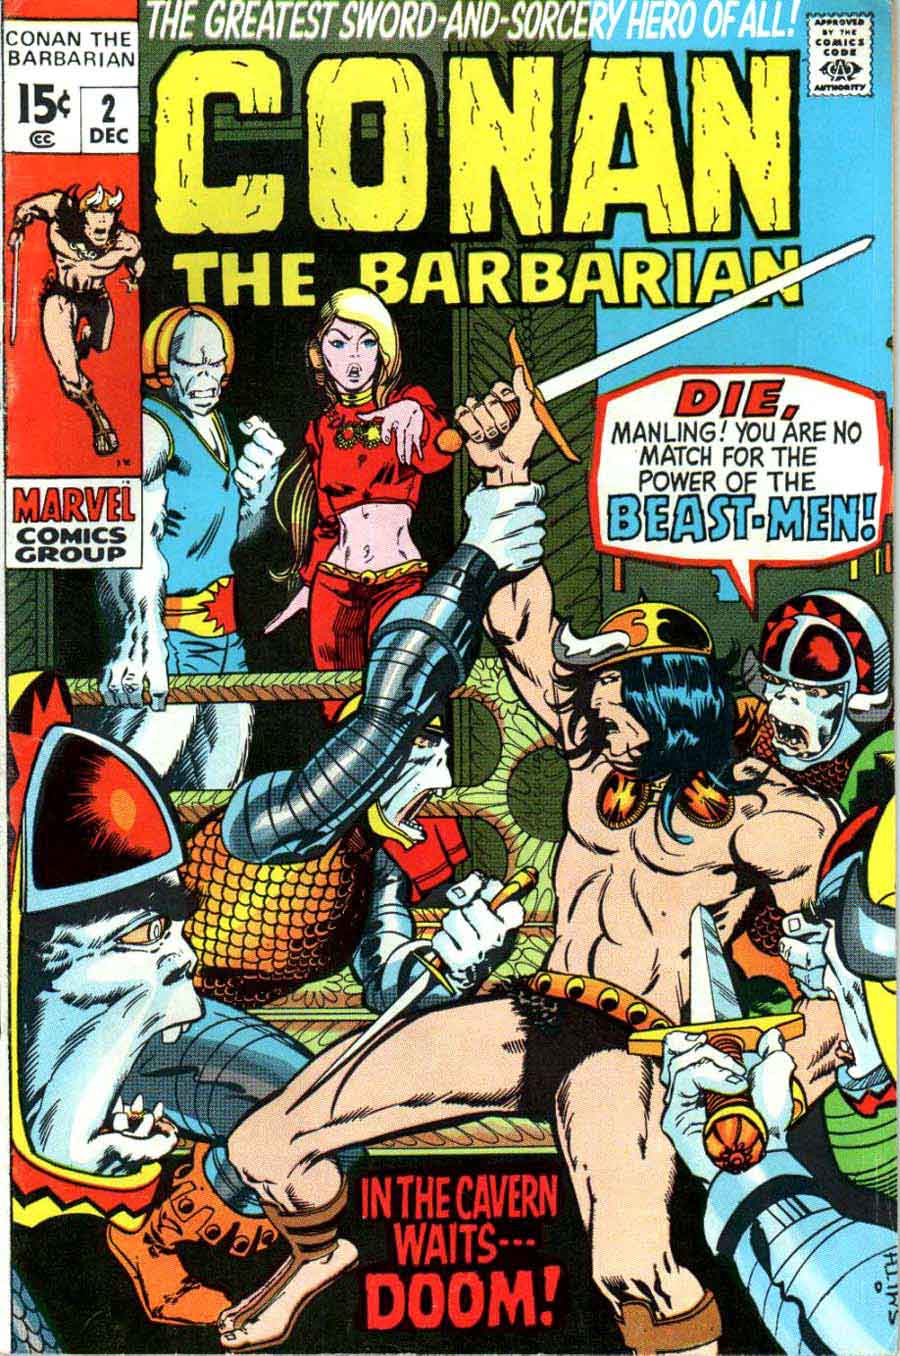 Conan the Barbarian v1 #2 marvel comic book cover art by Barry Windsor Smith